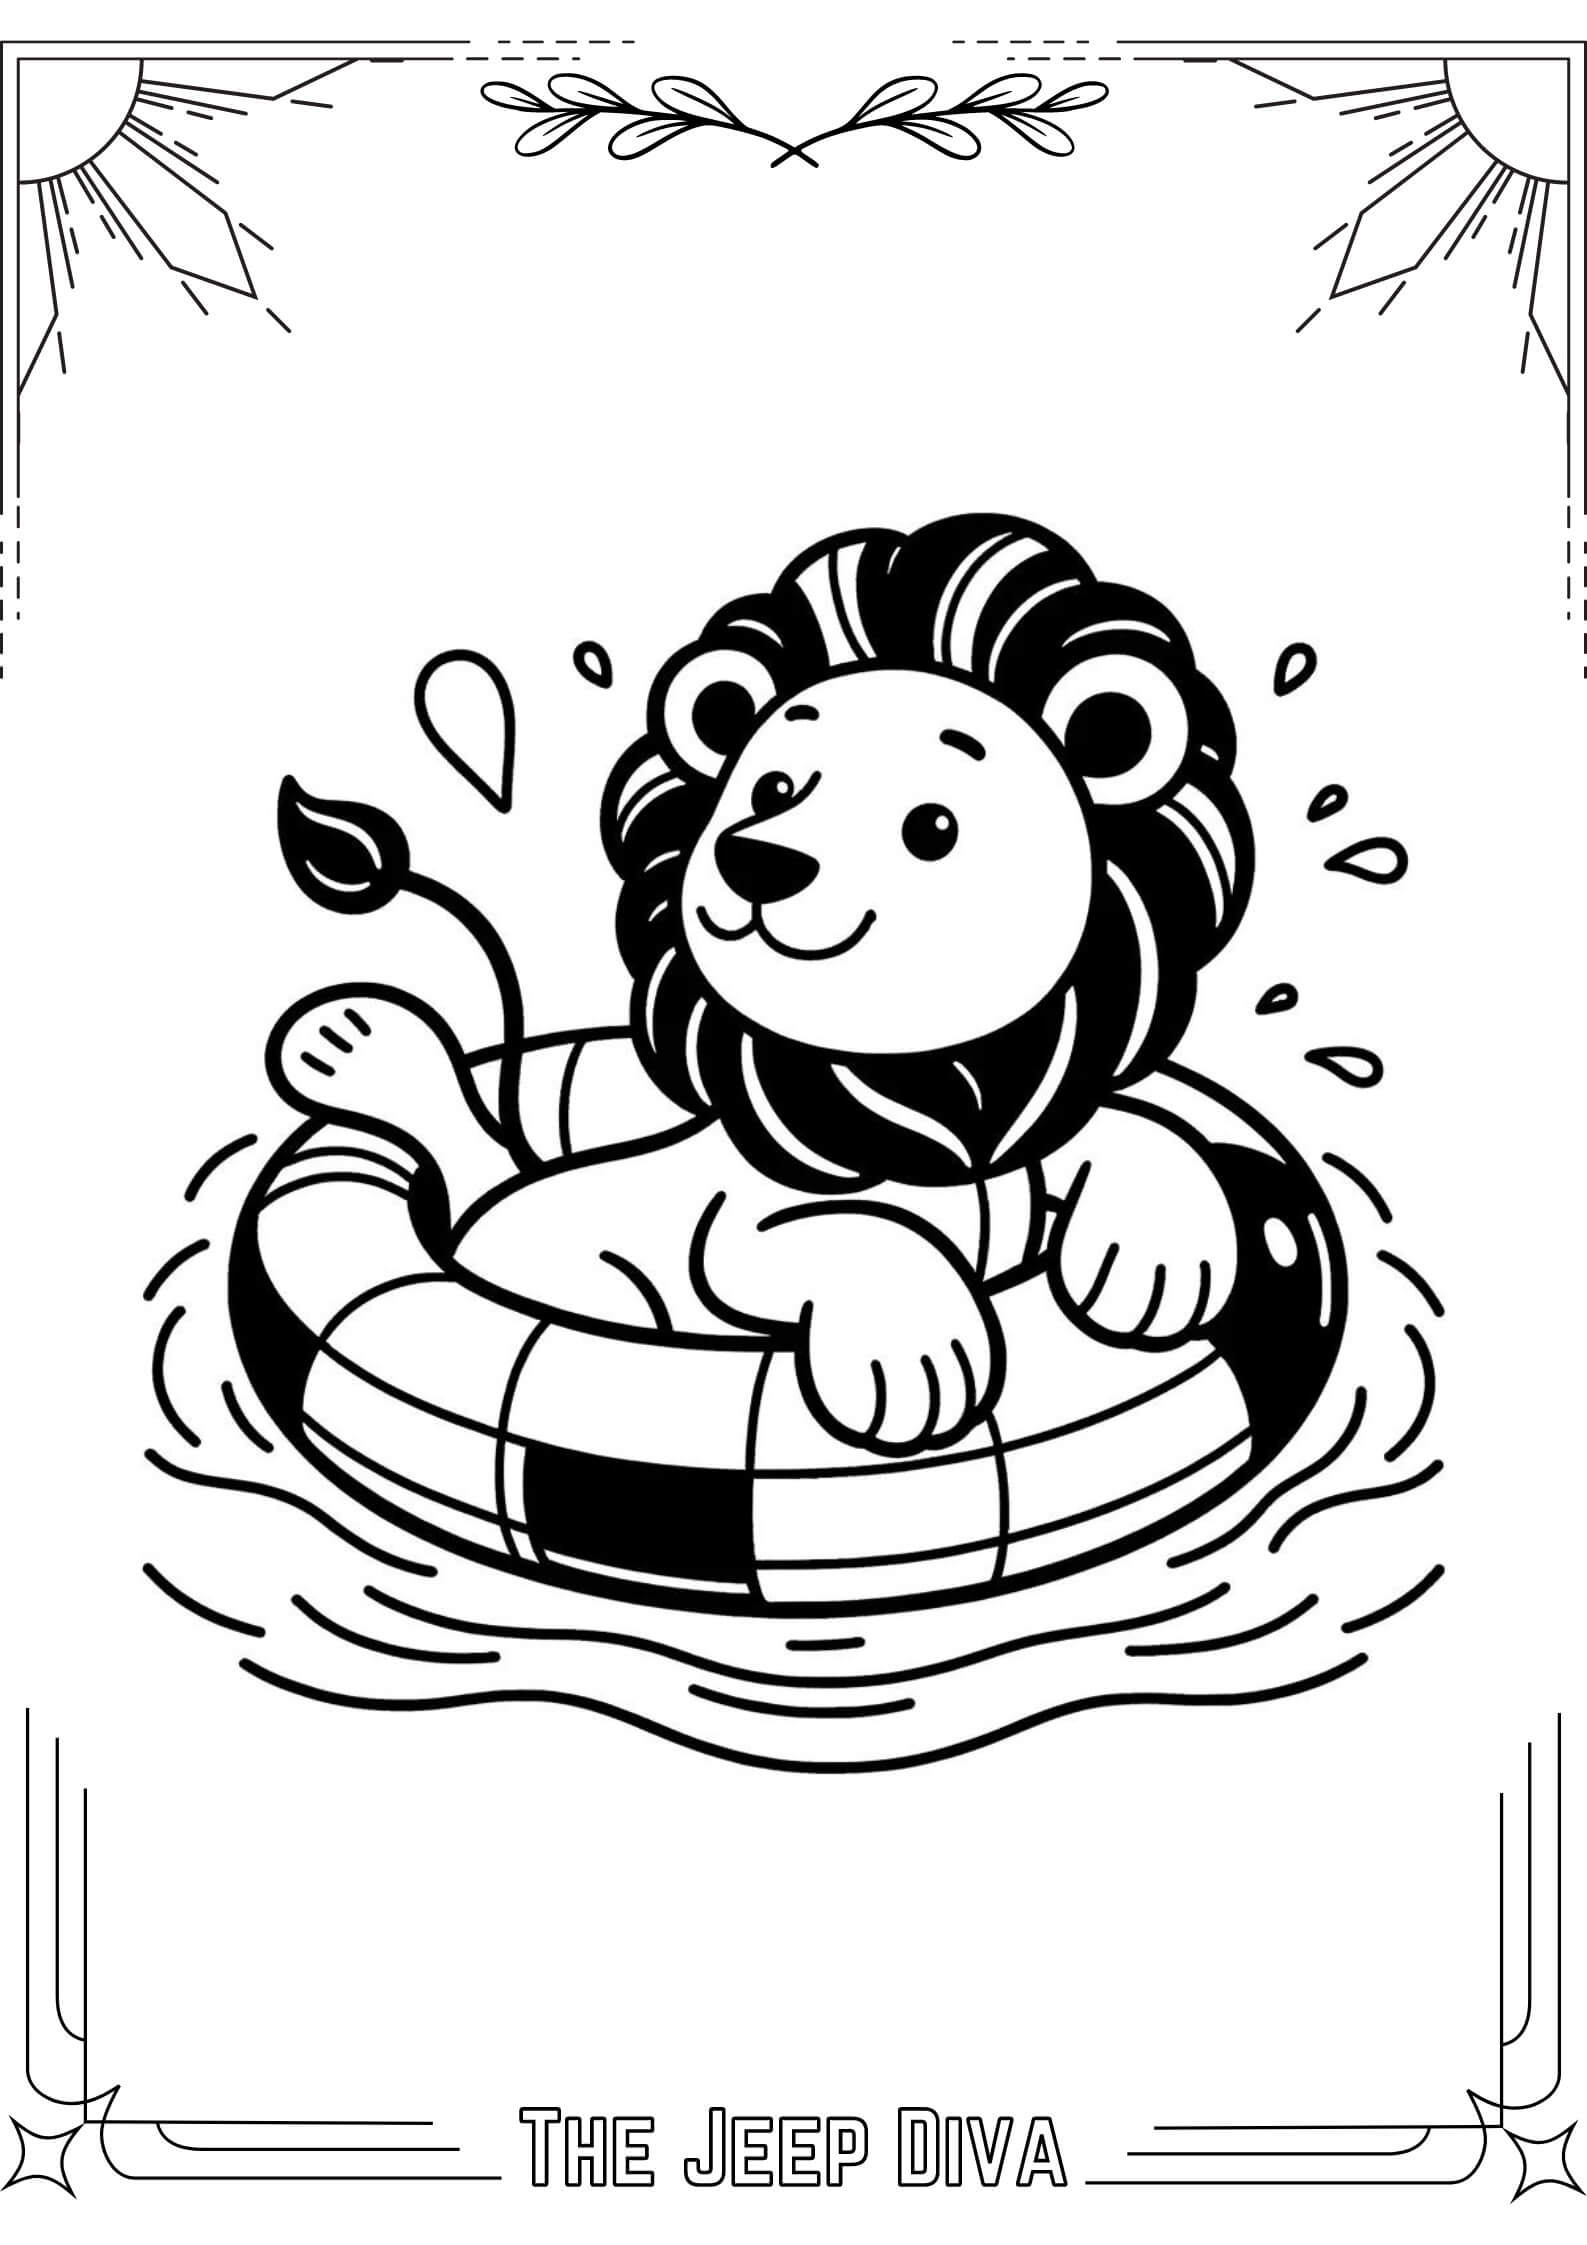 The Jeep Diva Coloring Page Lion Medium Difficulty 7